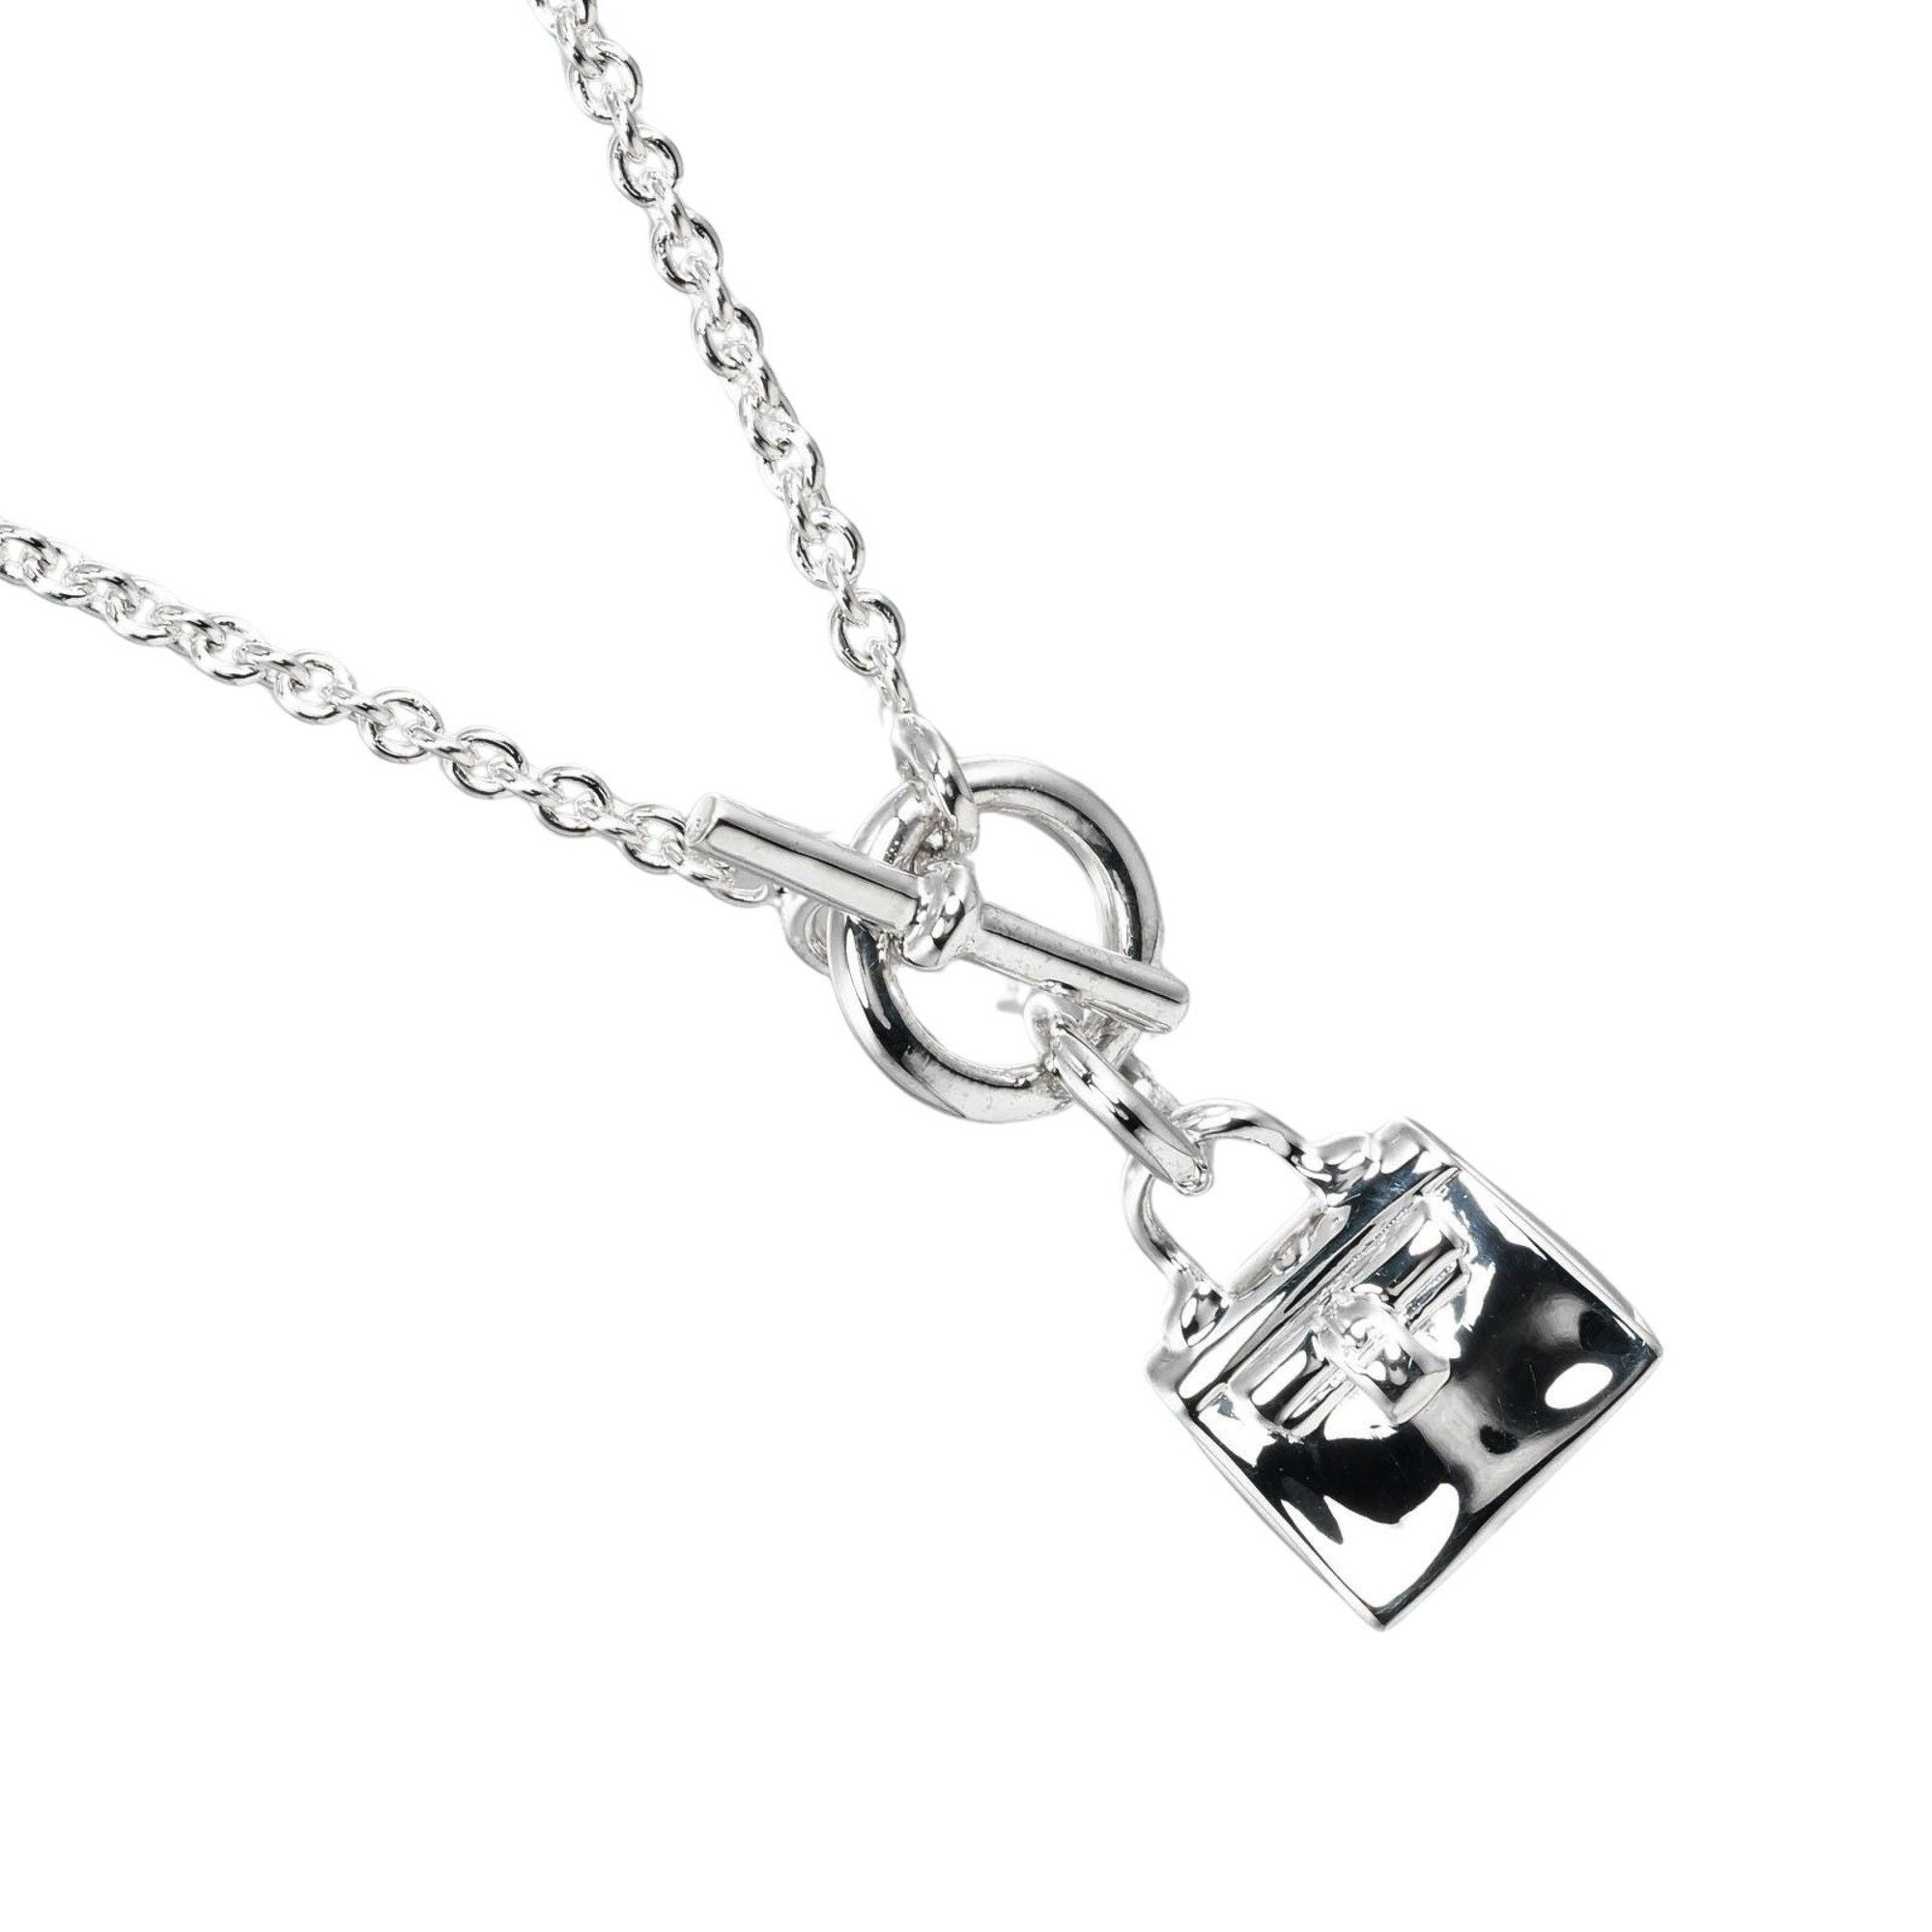 image of Hermes Amulet Kelly Necklace Silver 925 Approx. 12.2G T121724517, Women's